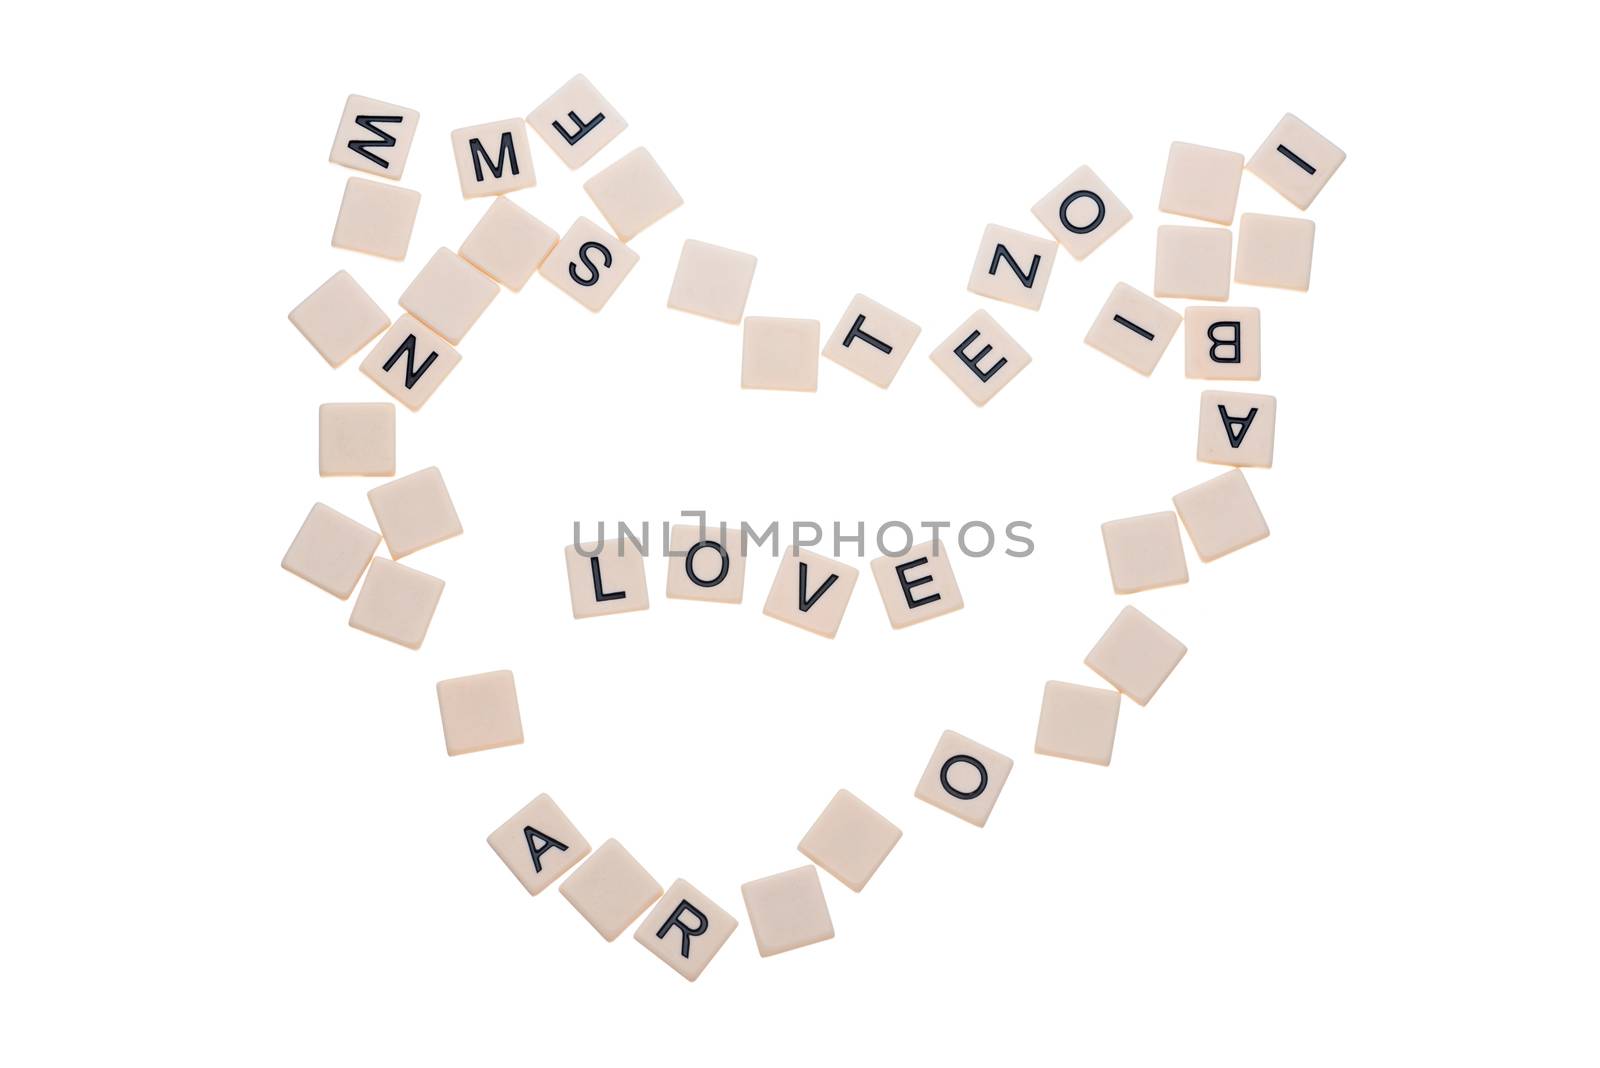 Small game tiles with letters on them arranged in a heart surrounding the word "love" isolated on a white background.